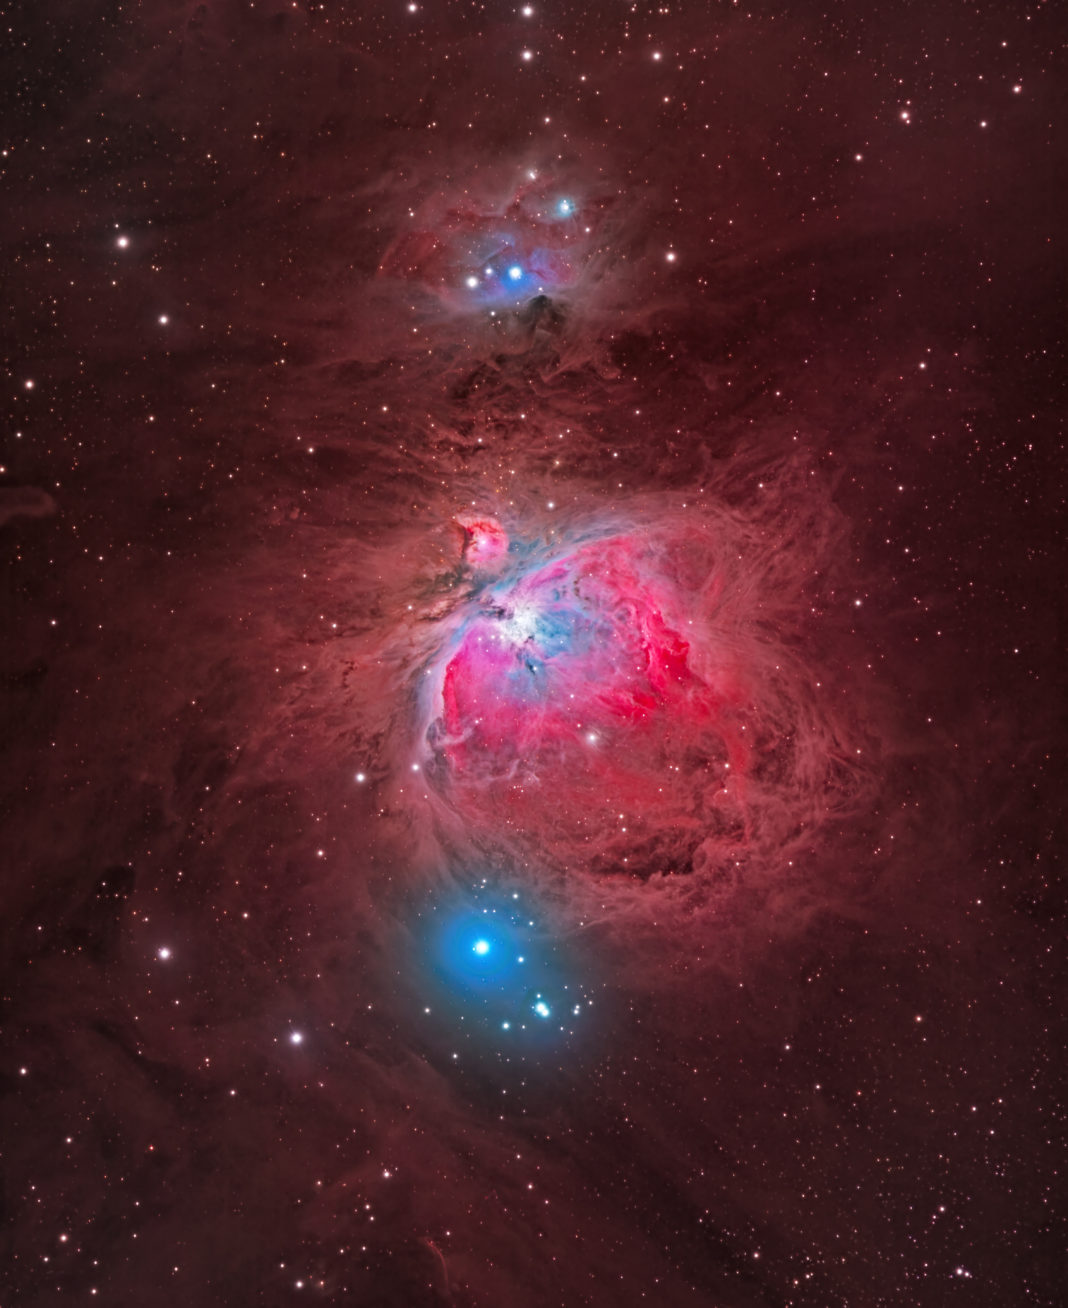 majestic Orion and Running Man nebulae taken by Dr. Gharib using a remote observatory